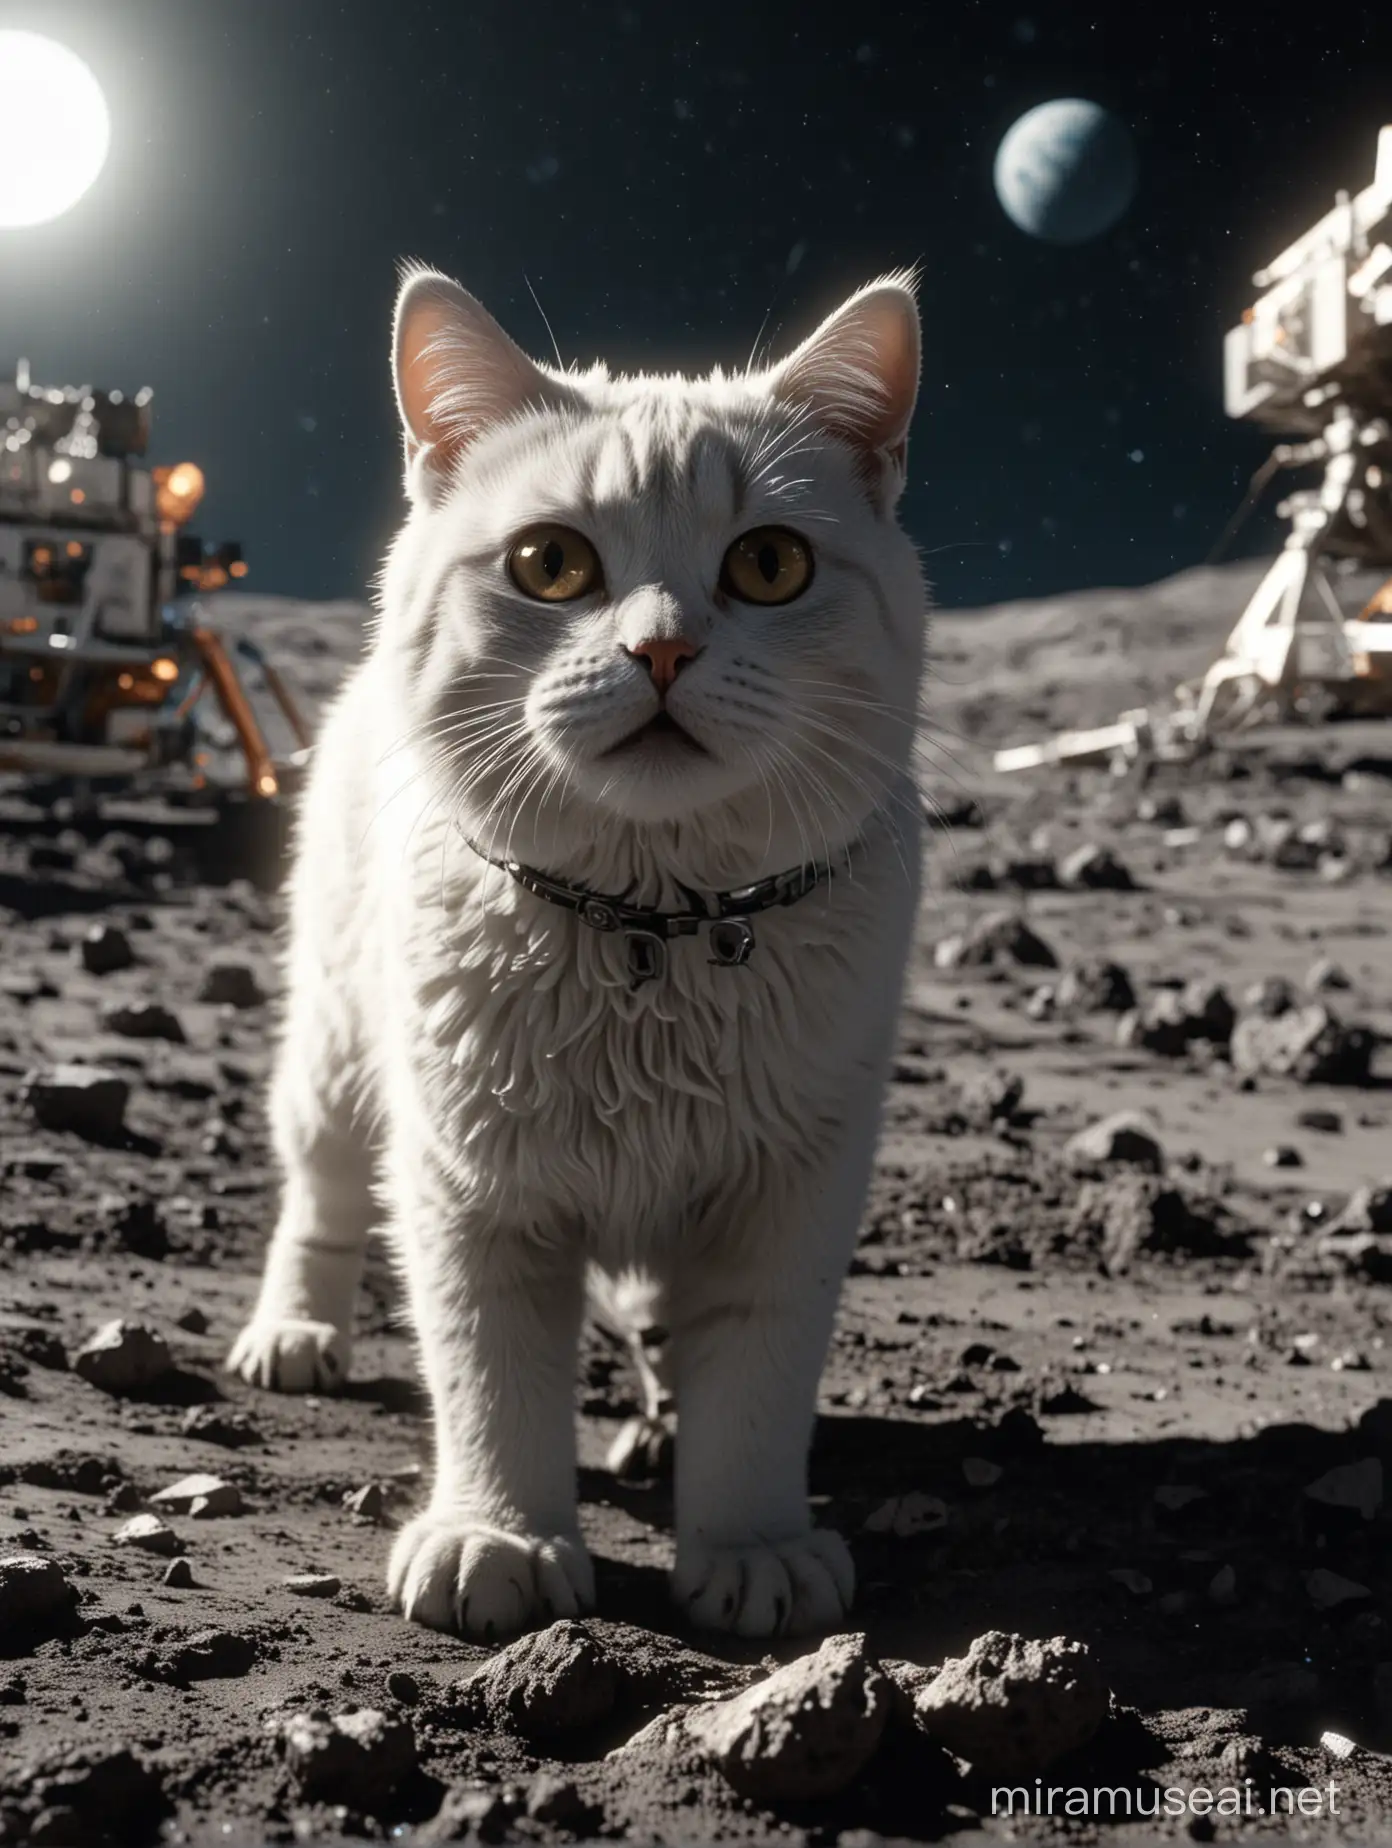 ASCII,masterpiece, hyper detailed, 8k, ray tracing, ultra sharp,
cinematic film still anime artwork,  cfb ,close up of a surprised and shocked cat foreground, (a mission apollo on the moon background:1.3), vibrant, highly detailed,  shallow depth of field,,cinemascope, moody, epic, gorgeous, film grain, grainy,meme,parody,deep black sky, apollo_style